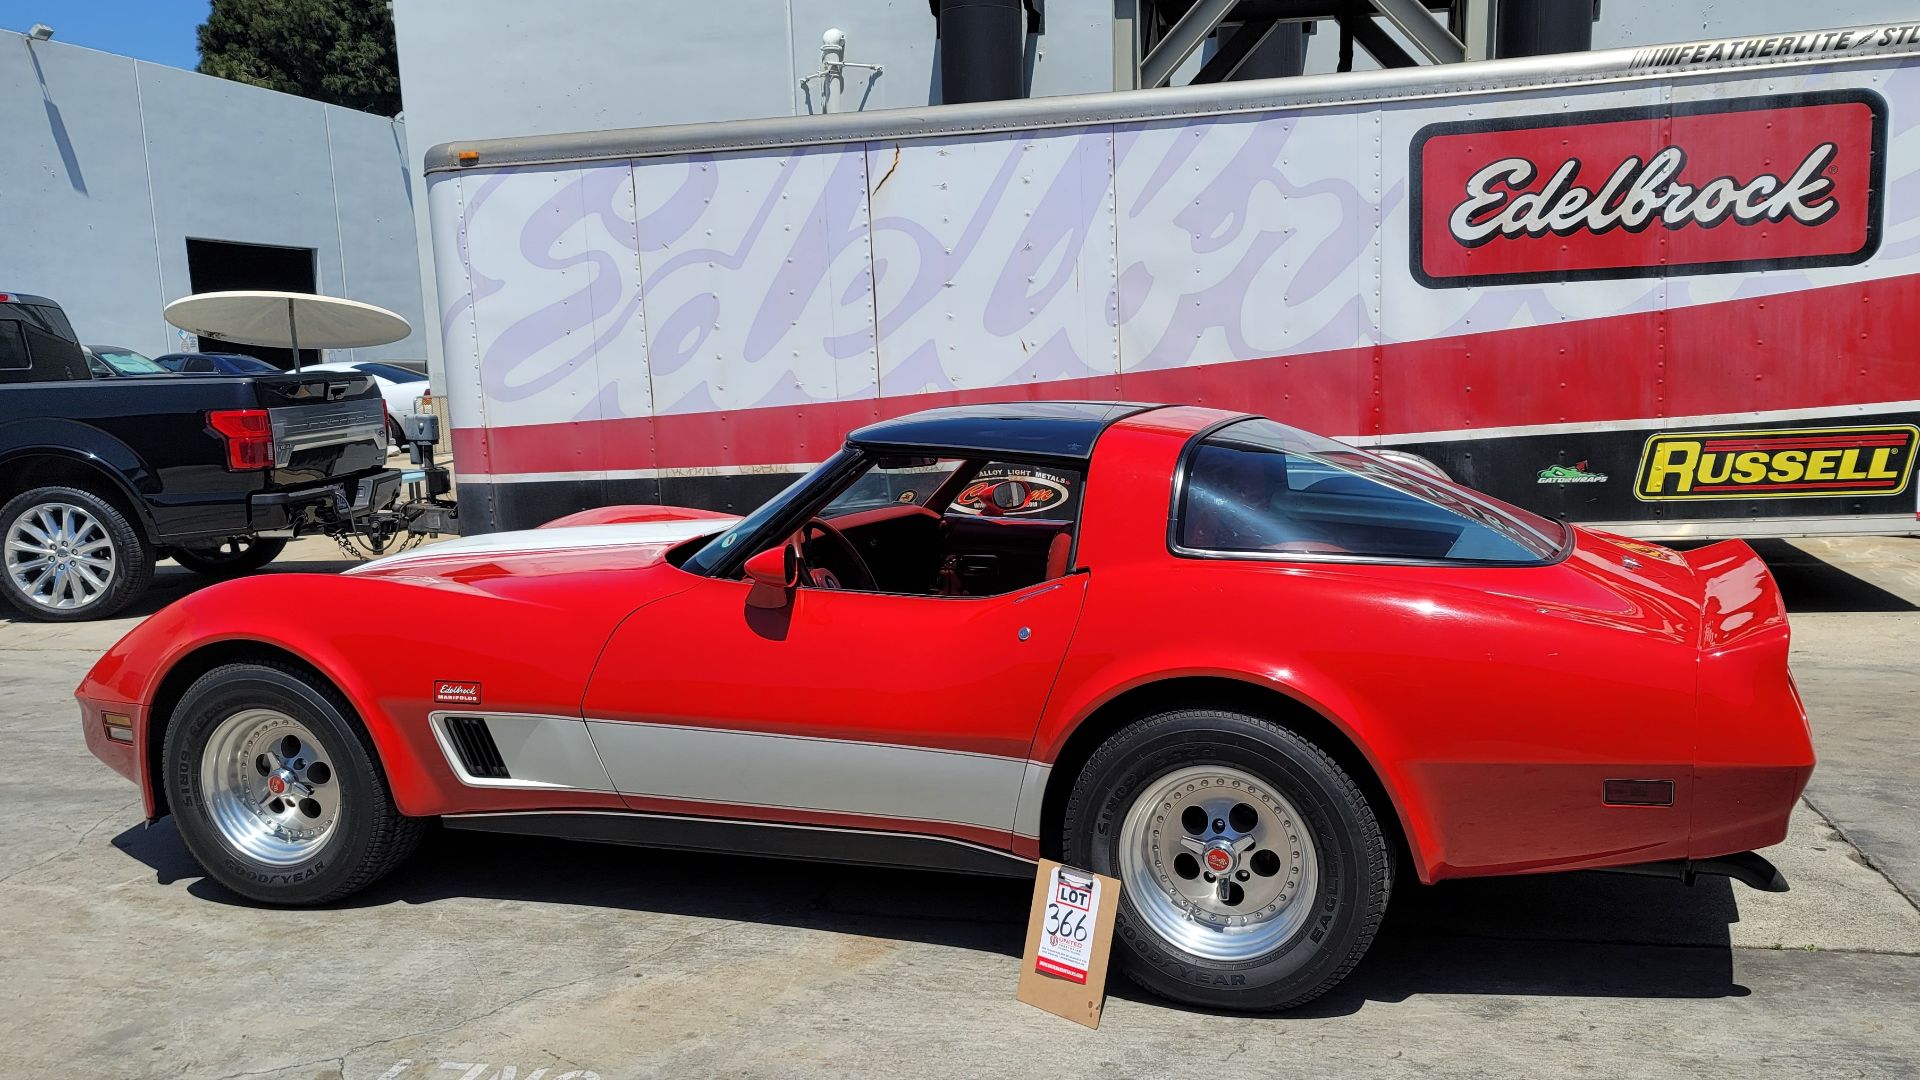 1980 CHEVROLET CORVETTE, WAS VIC EDELBROCK'S PERSONAL CAR BOUGHT FOR R&D, RED INTERIOR, TITLE ONLY. - Image 3 of 70